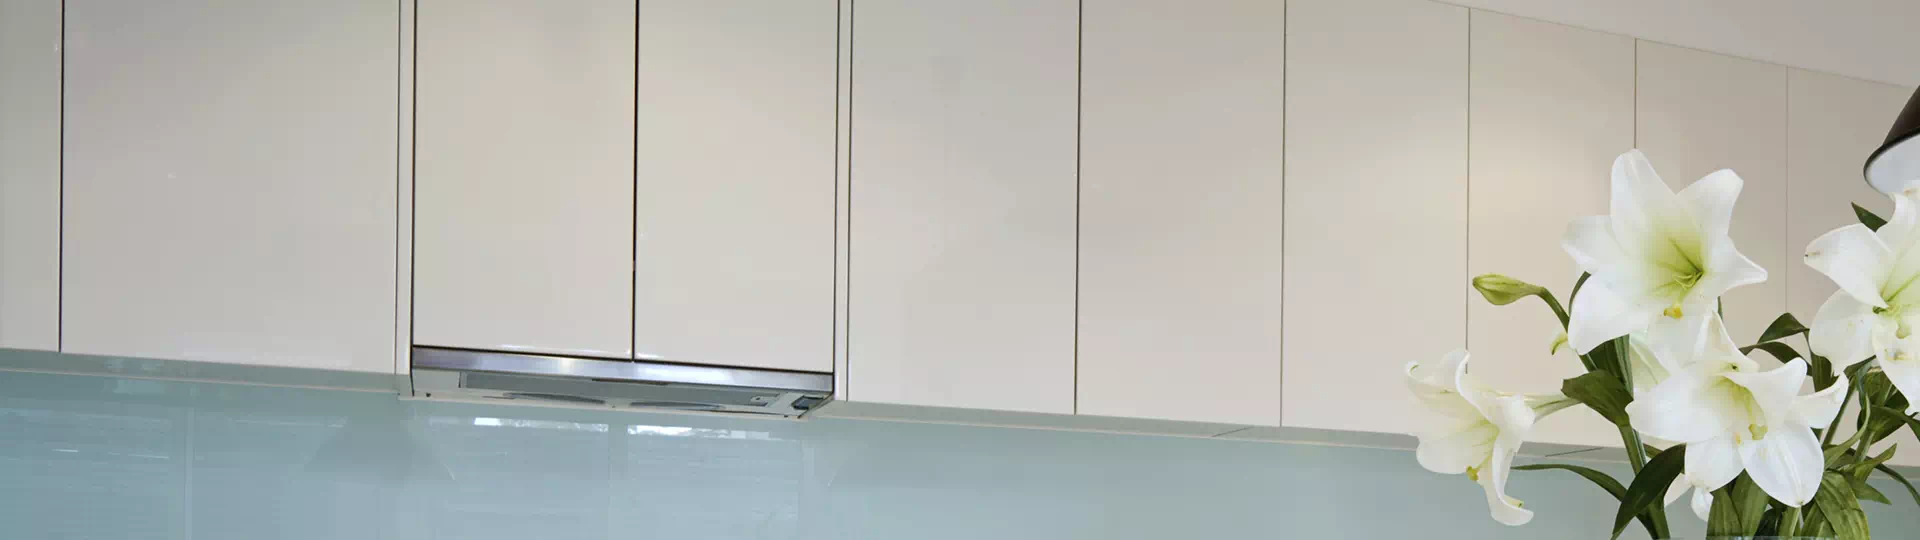 How To Clean Laminate Cabinets Simple, How To Clean White Laminate Cabinets